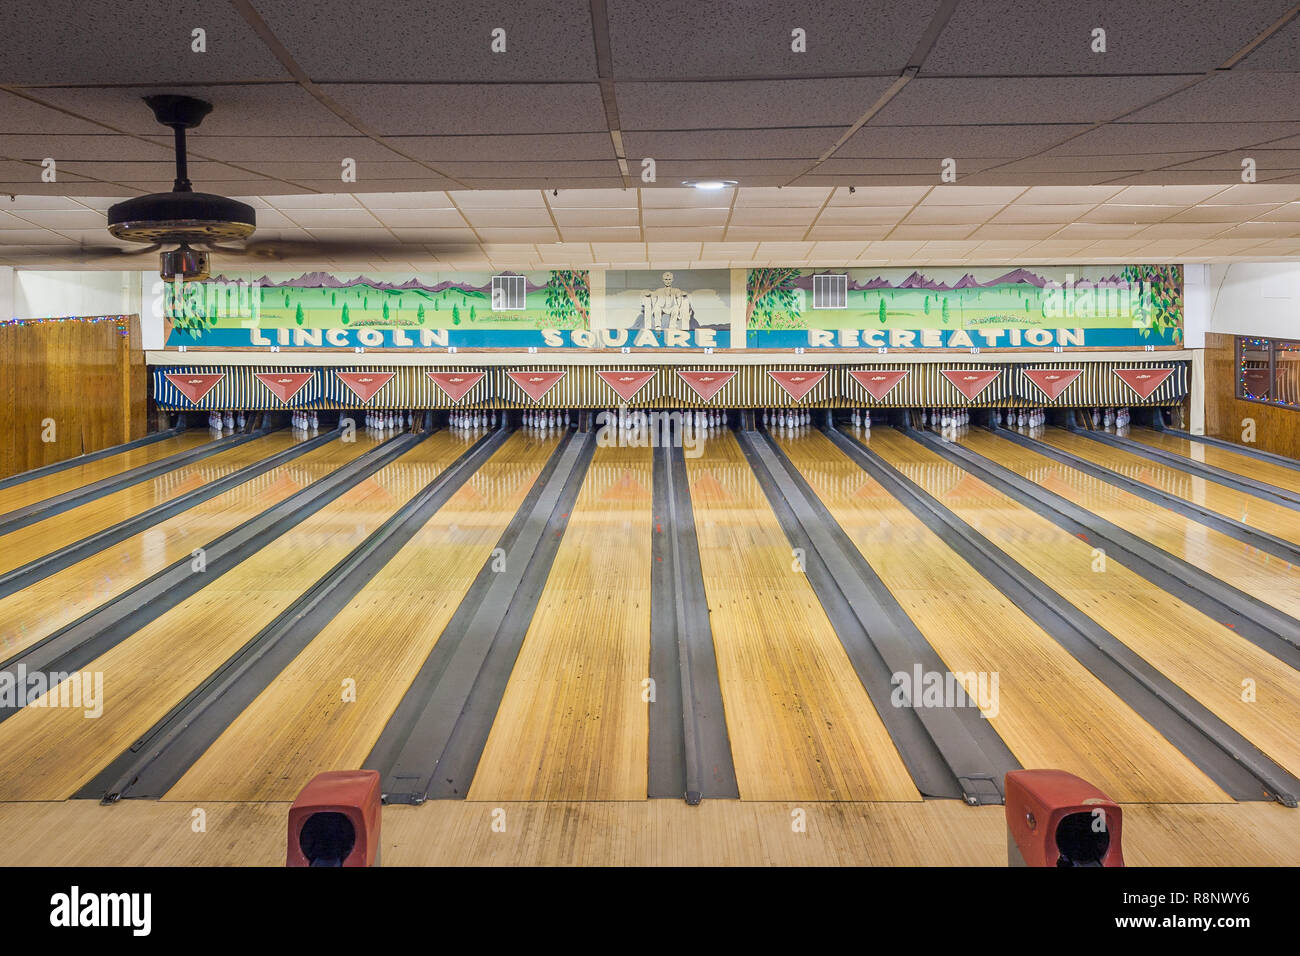 Interior of Lincoln Lanes bowling alley in the Lincoln Square ...